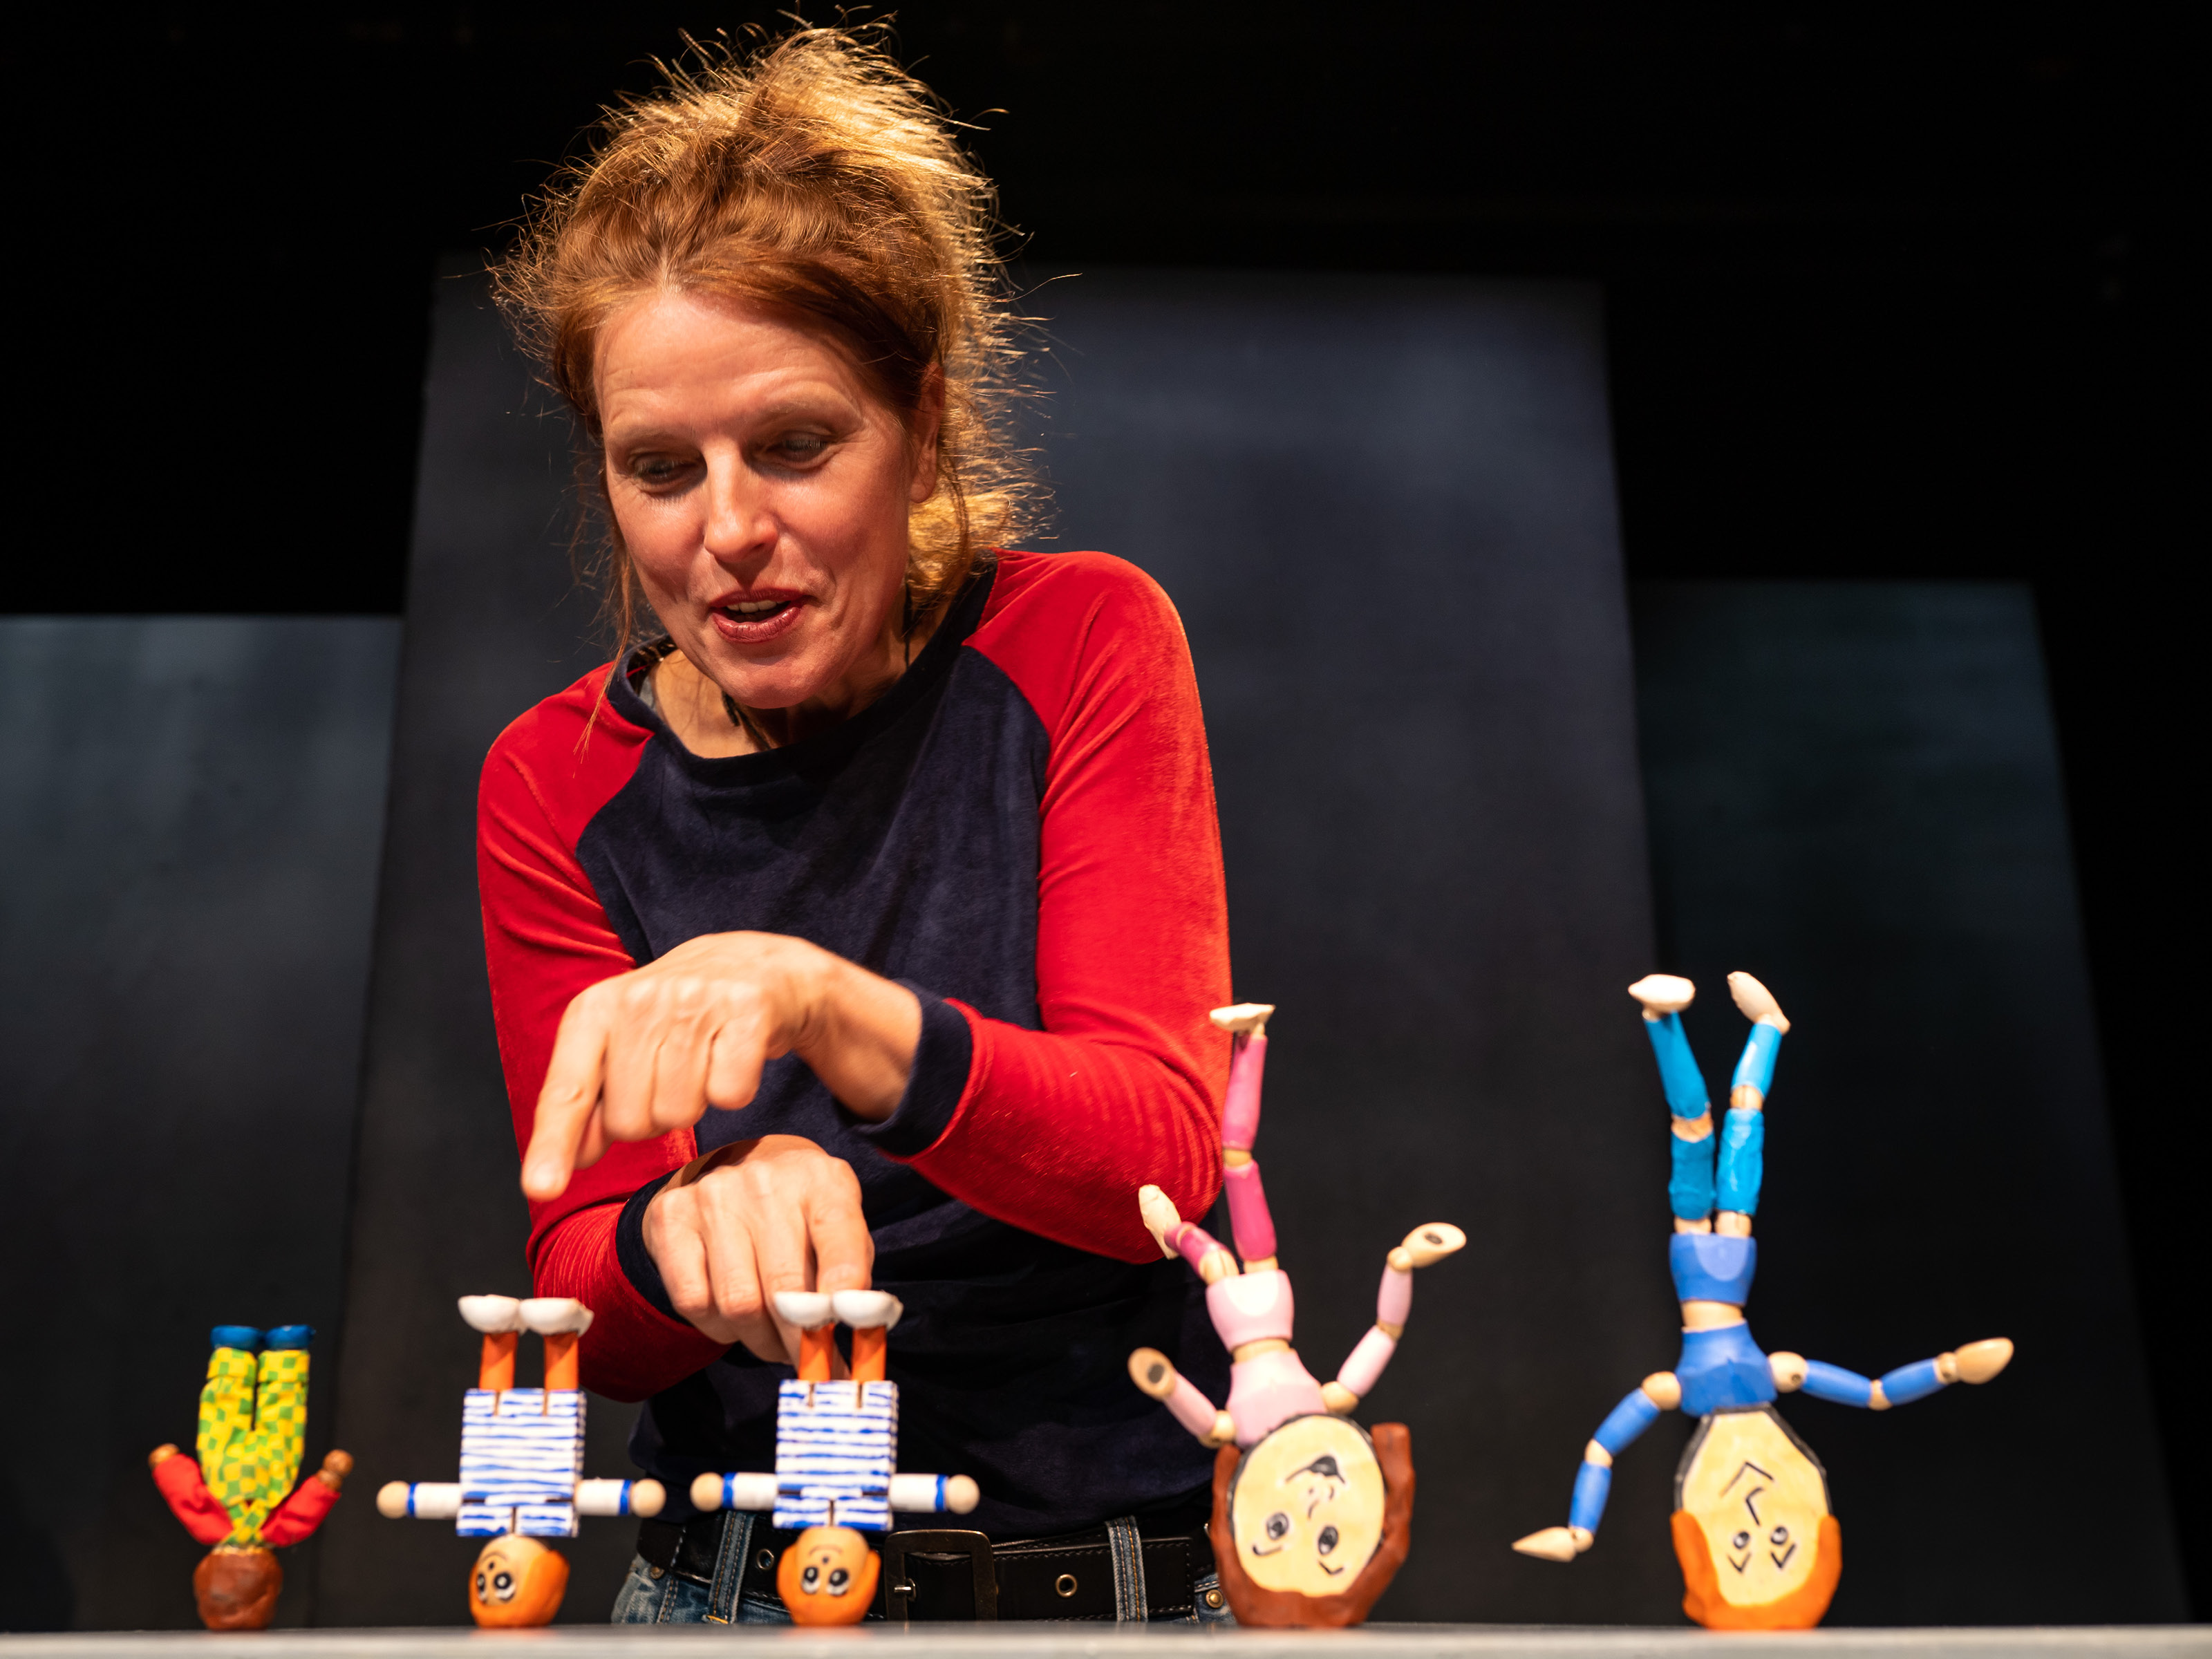 Five figures stand upside down in front of puppeteer Annegret Geist, their legs stretched up in the air. She has stretched out her finger and is pointing at one of the smaller figures.